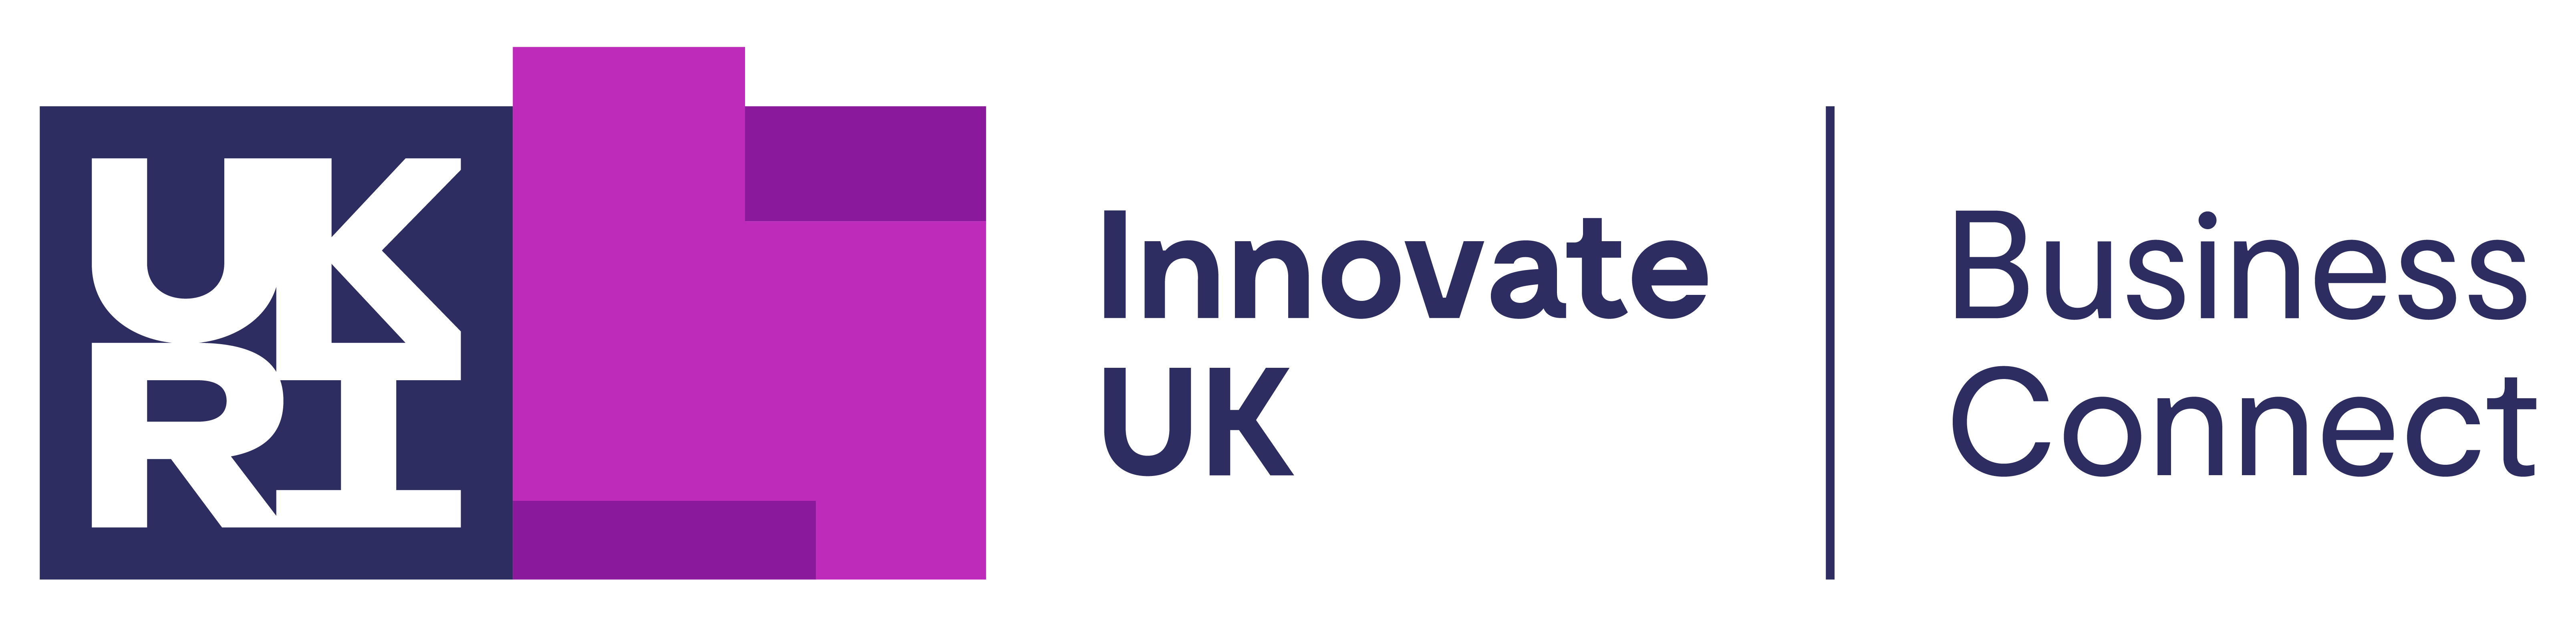 Innovate UK Business Connect